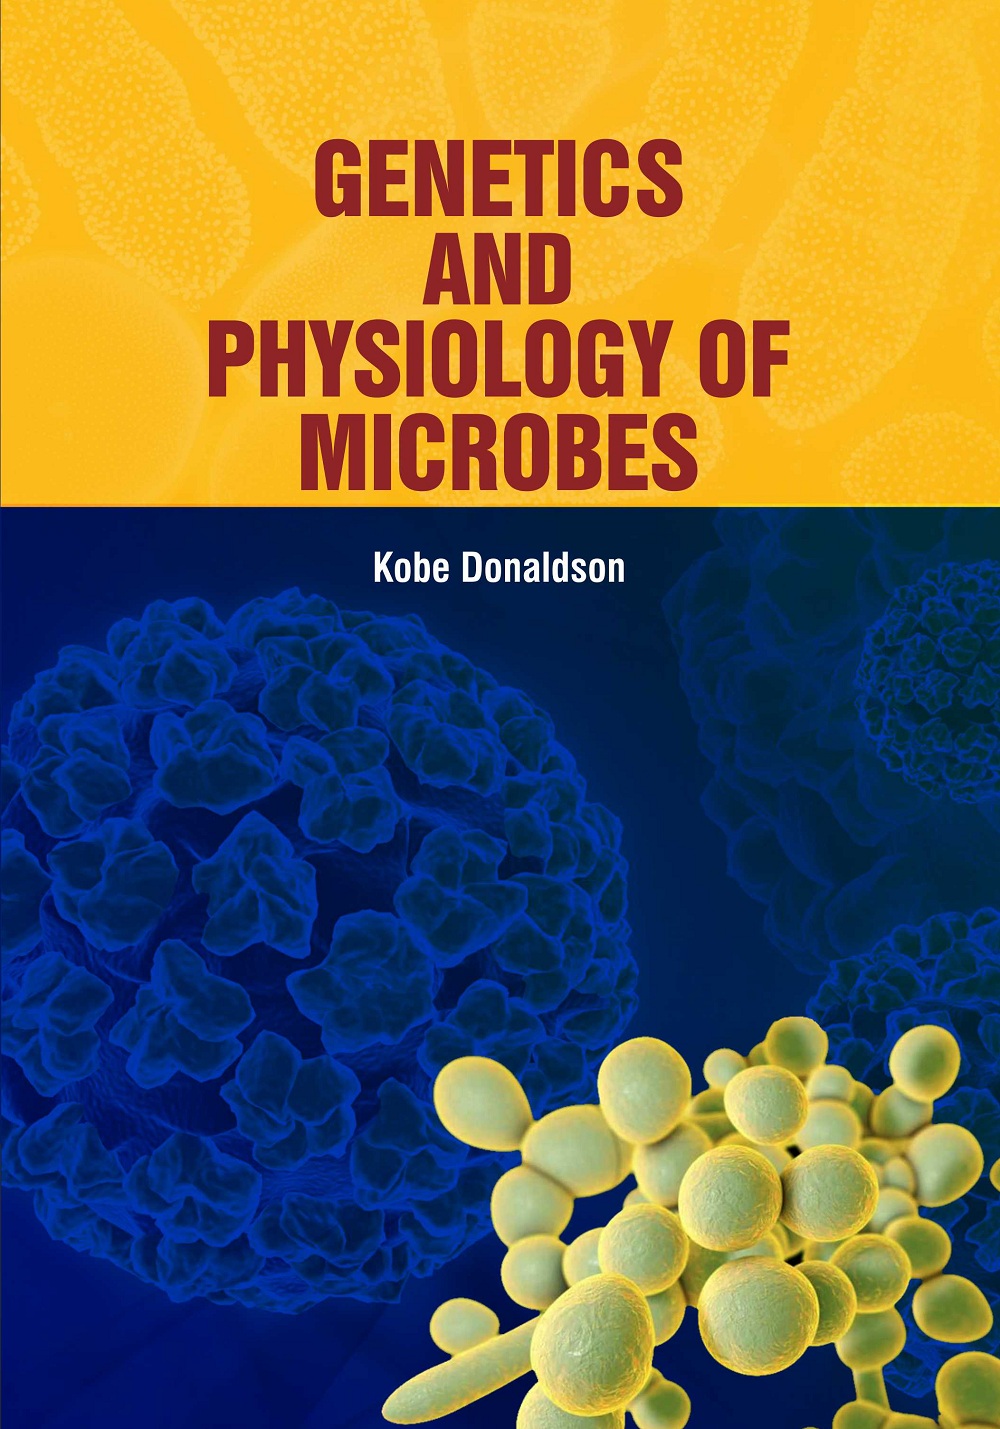 Genetics and Physiology of Microbes